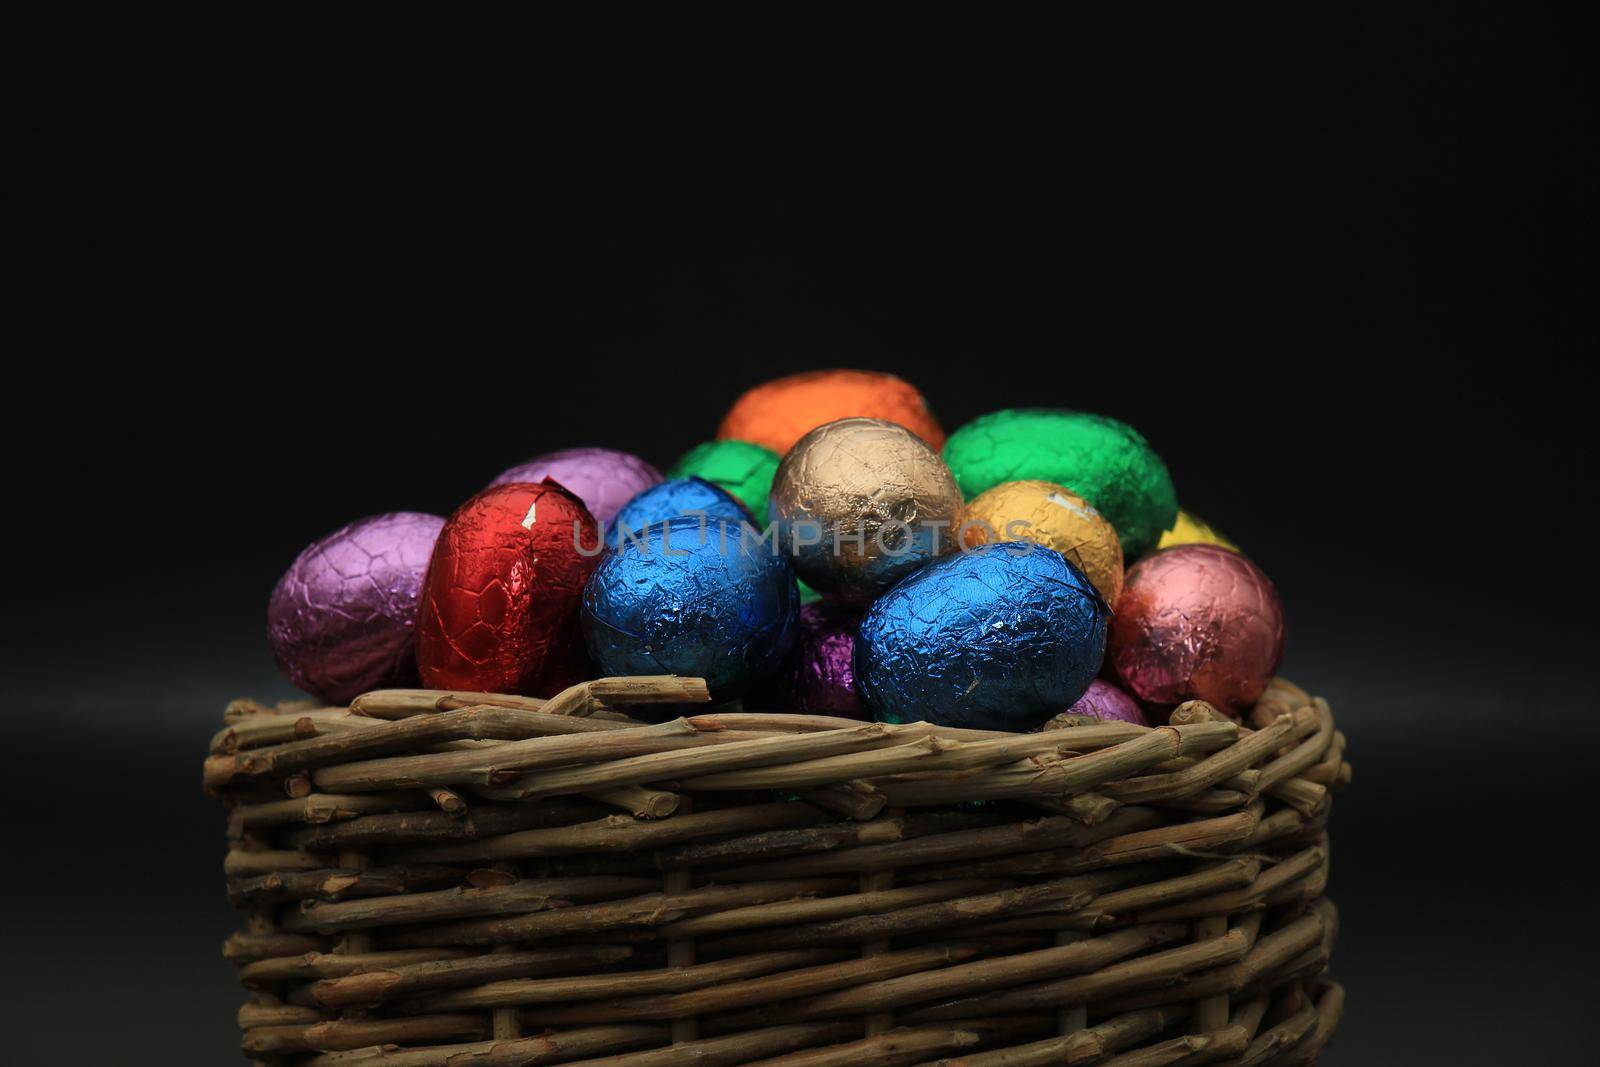 Foil wrapped chocolate easter eggs by studioportosabbia